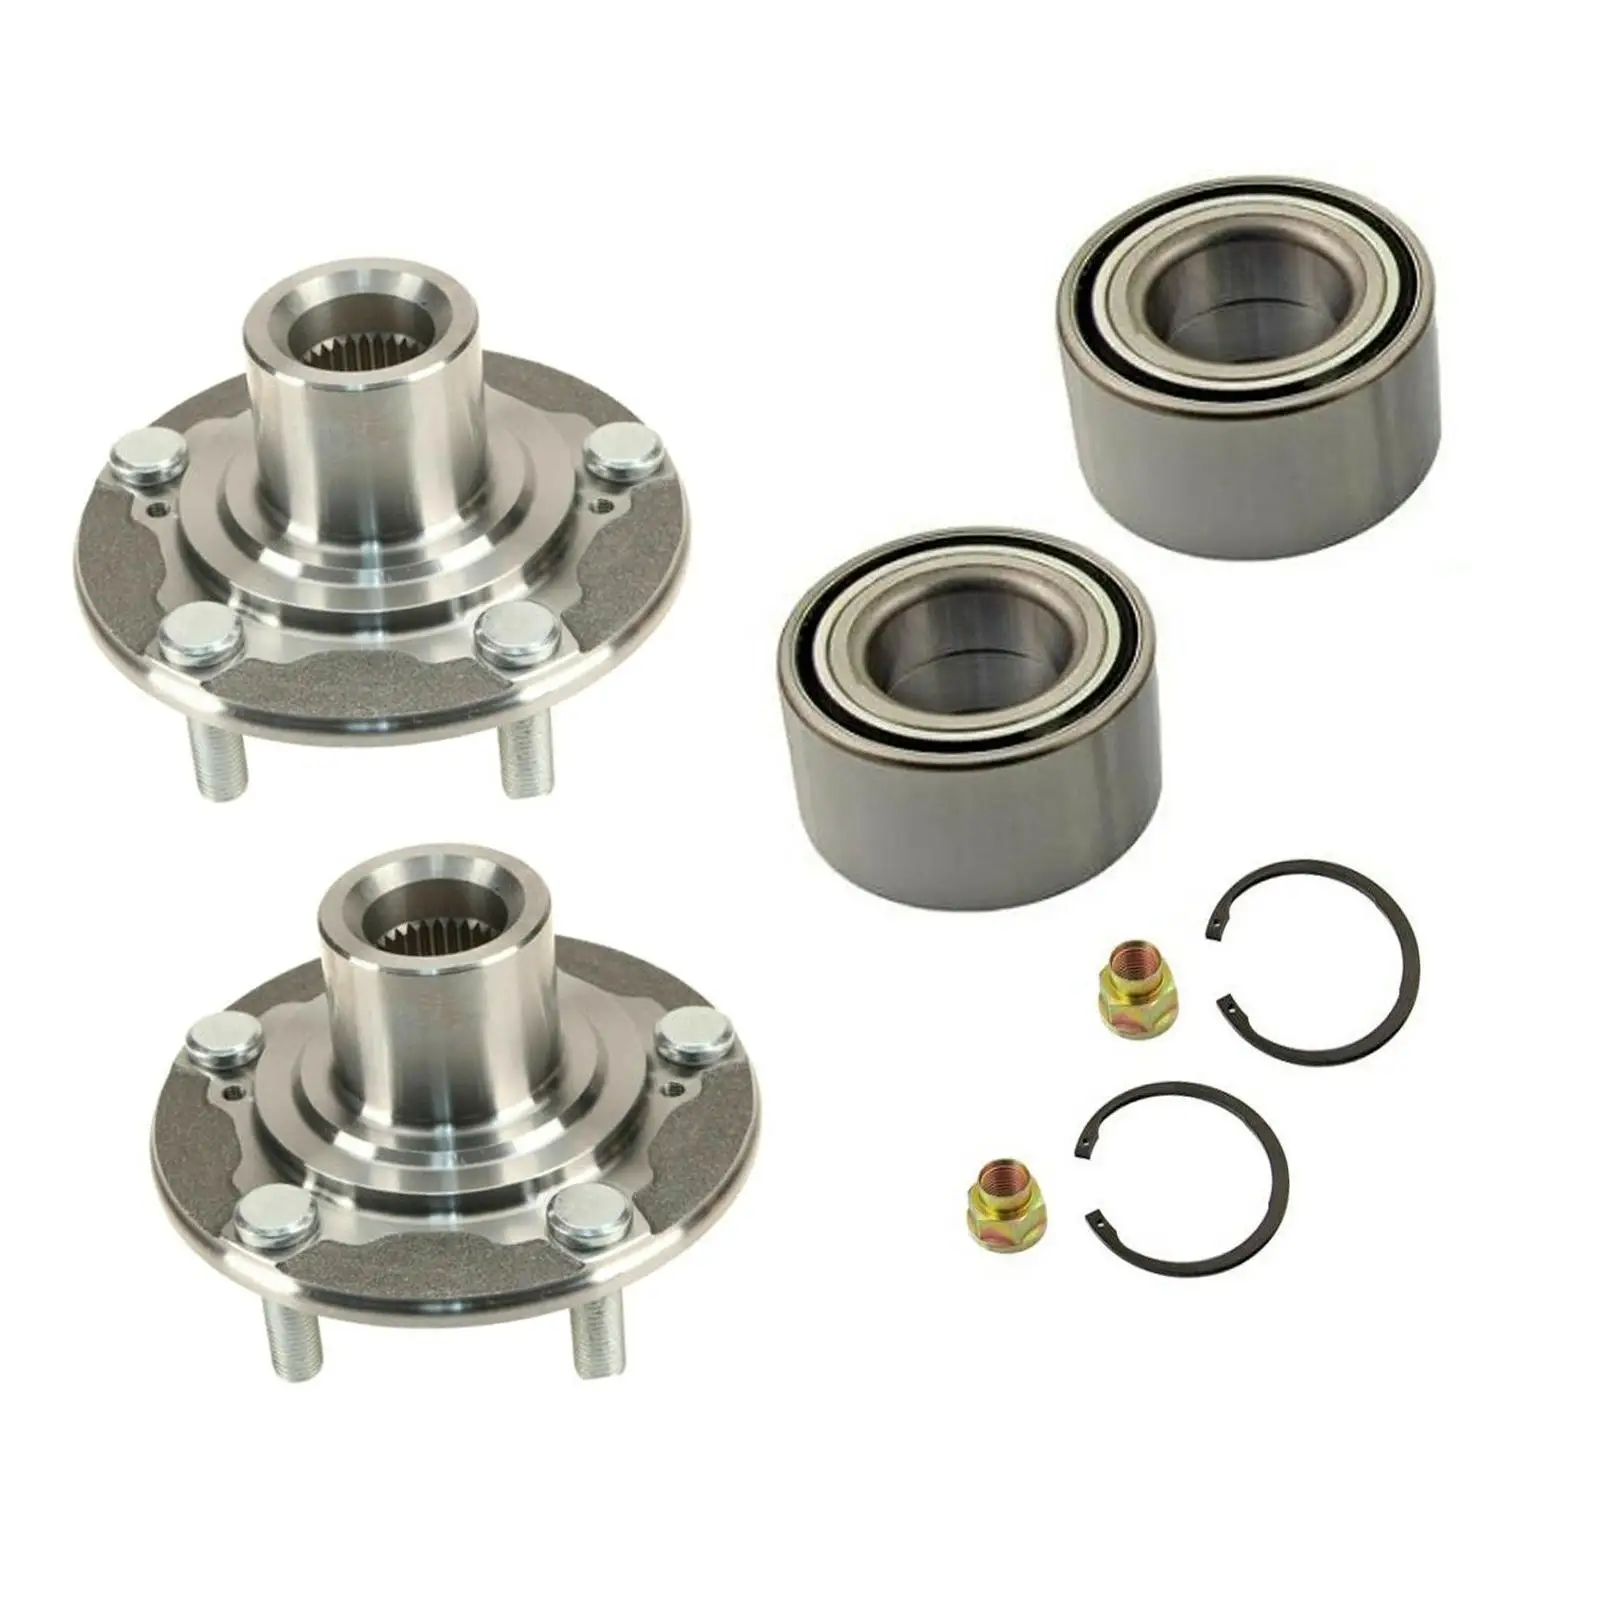 2x Front Wheel Hub and Bearing Repair Kits Professional Durable Easy to Install Spare Parts Left and Right for Honda Accord